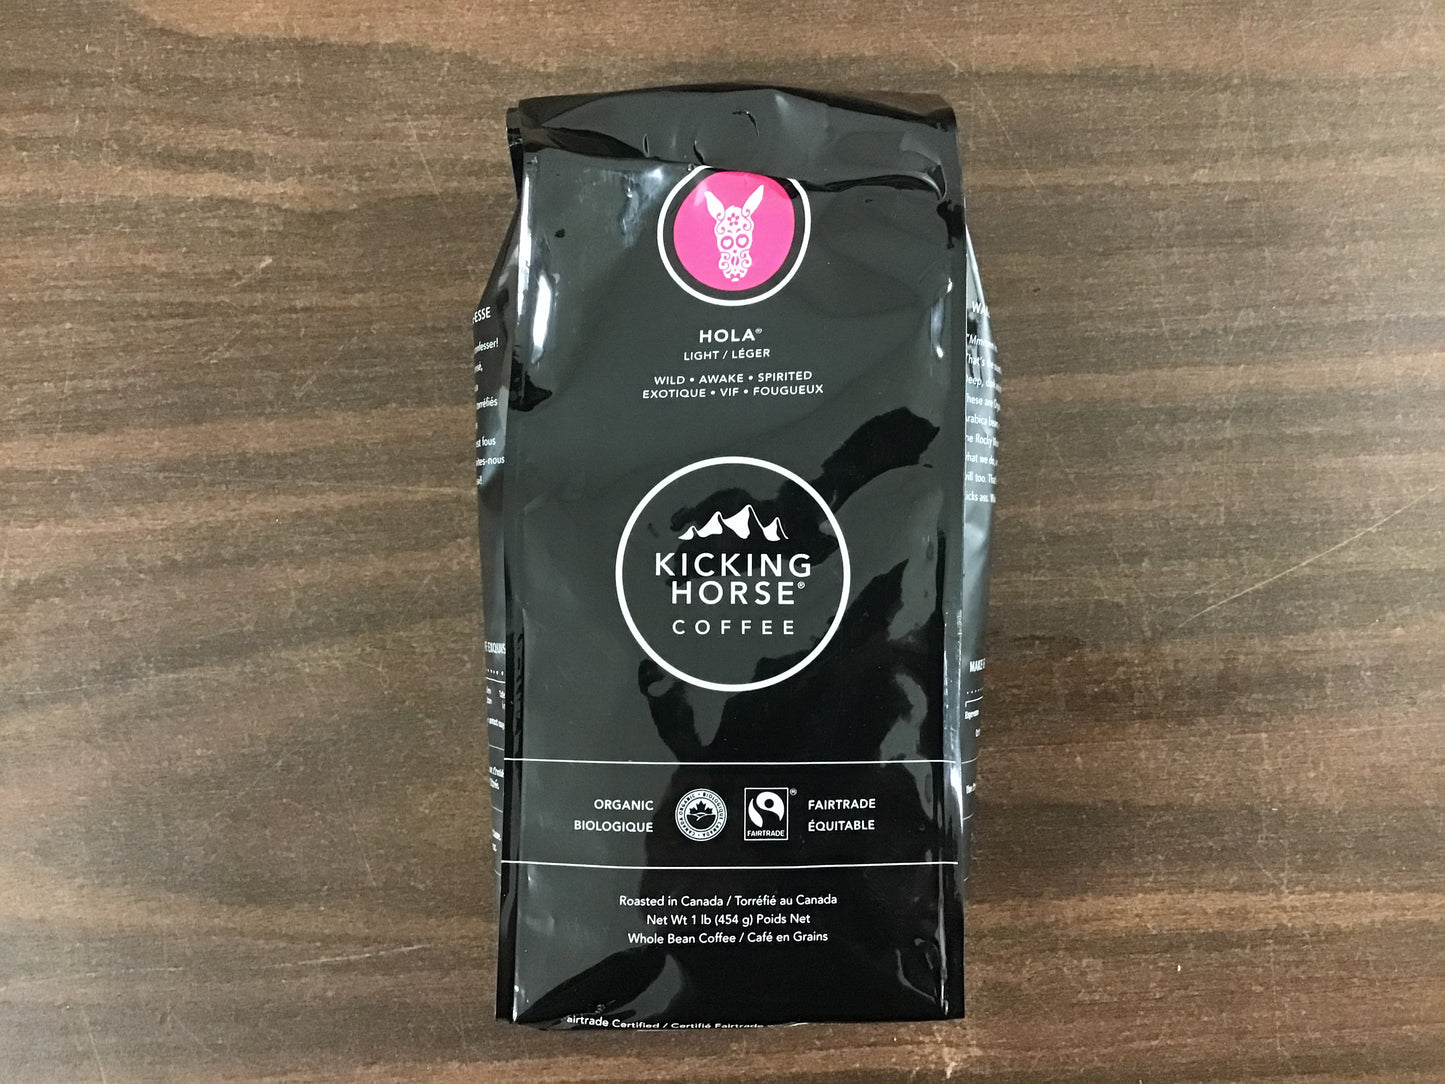 Kicking horse coffee beans (not grounded)